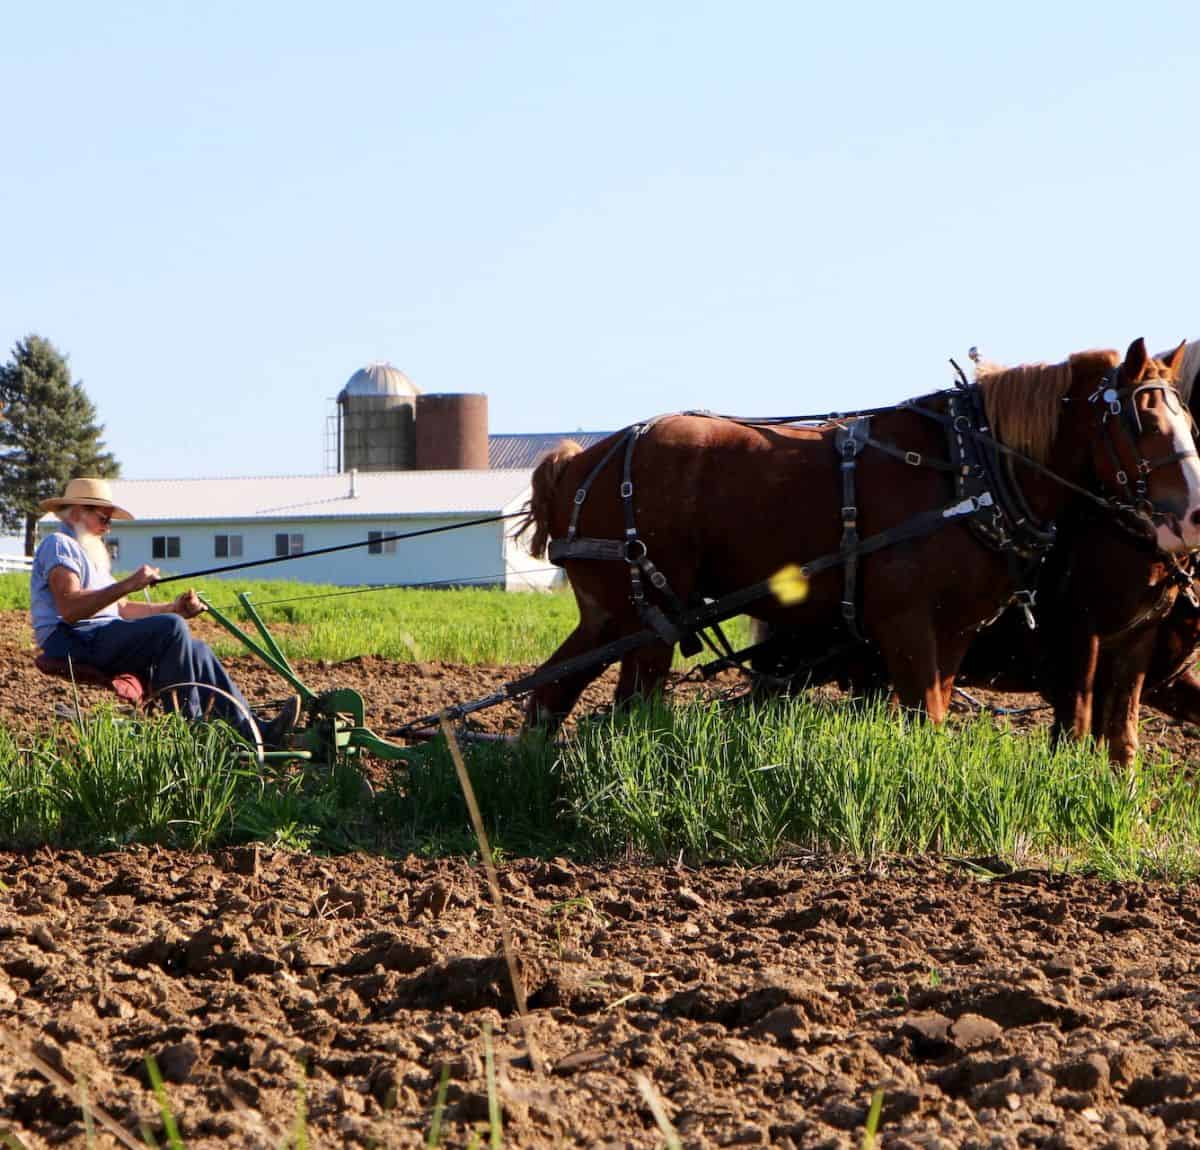 Amish man with a long white beard and no mustache, working in the field with his horses.